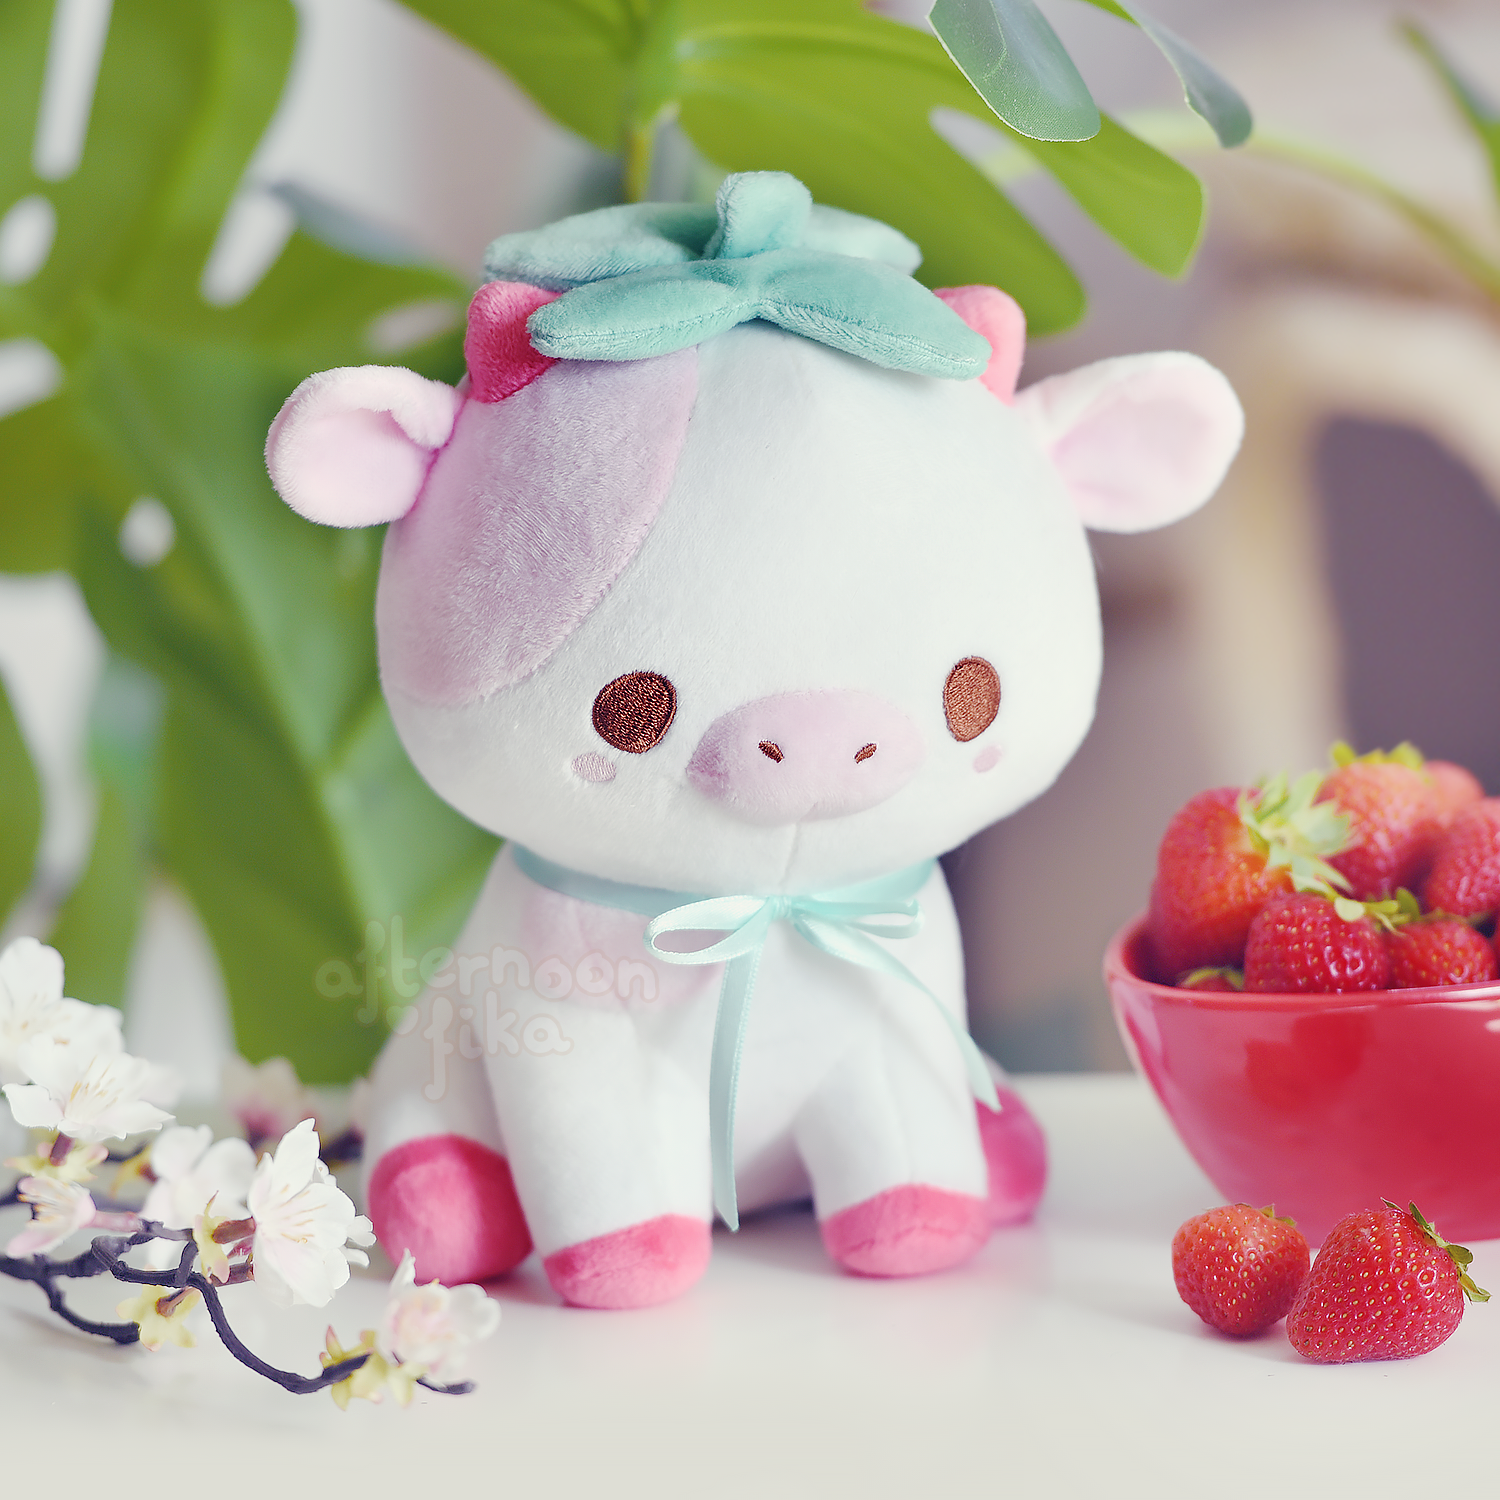 Milkshake the strawberry cow plush and friends by Sugary Carousel